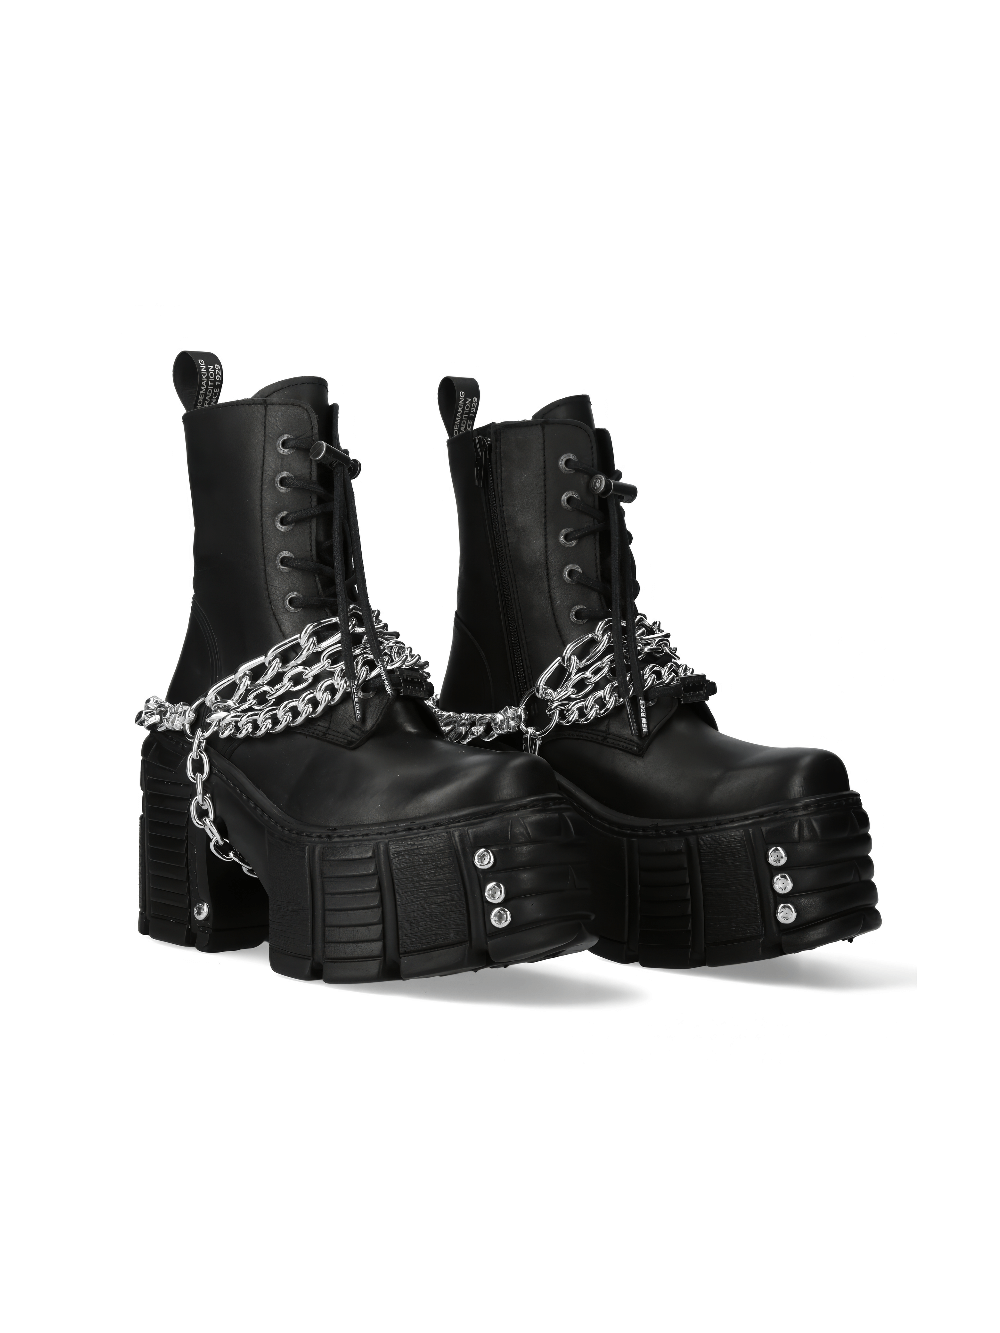 NEW ROCK Black Lace-Up Ankle Boot with Chains and Platform